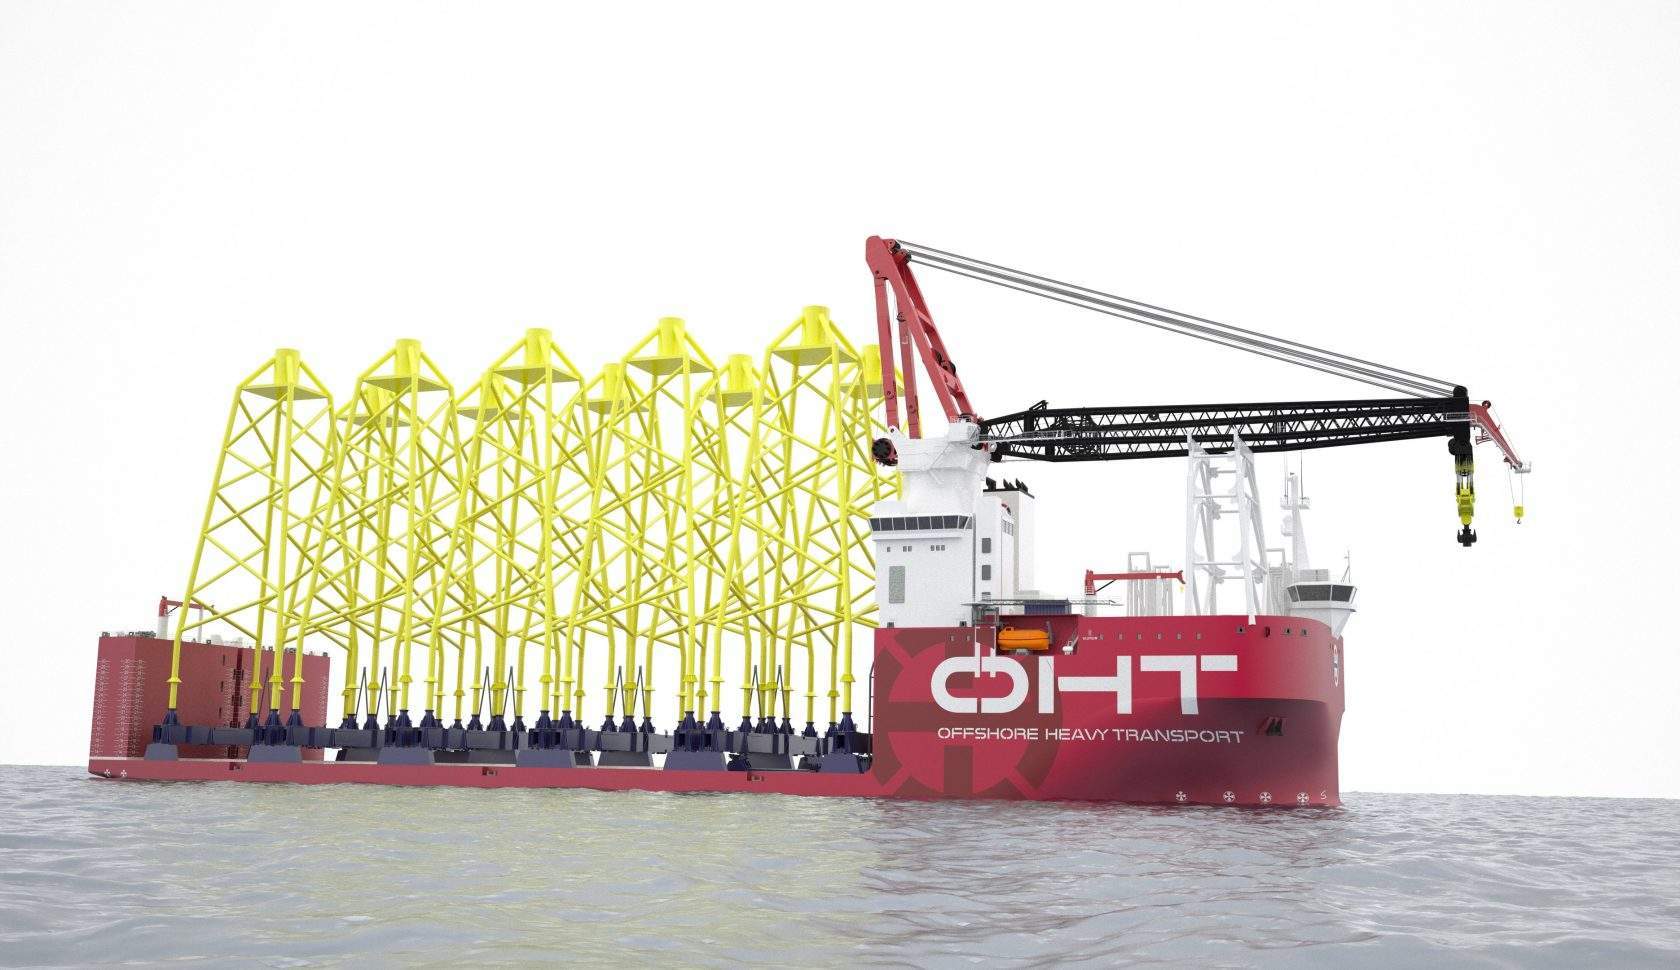 OHT to enter offshore renewables installation market with new heavy lifting vessel